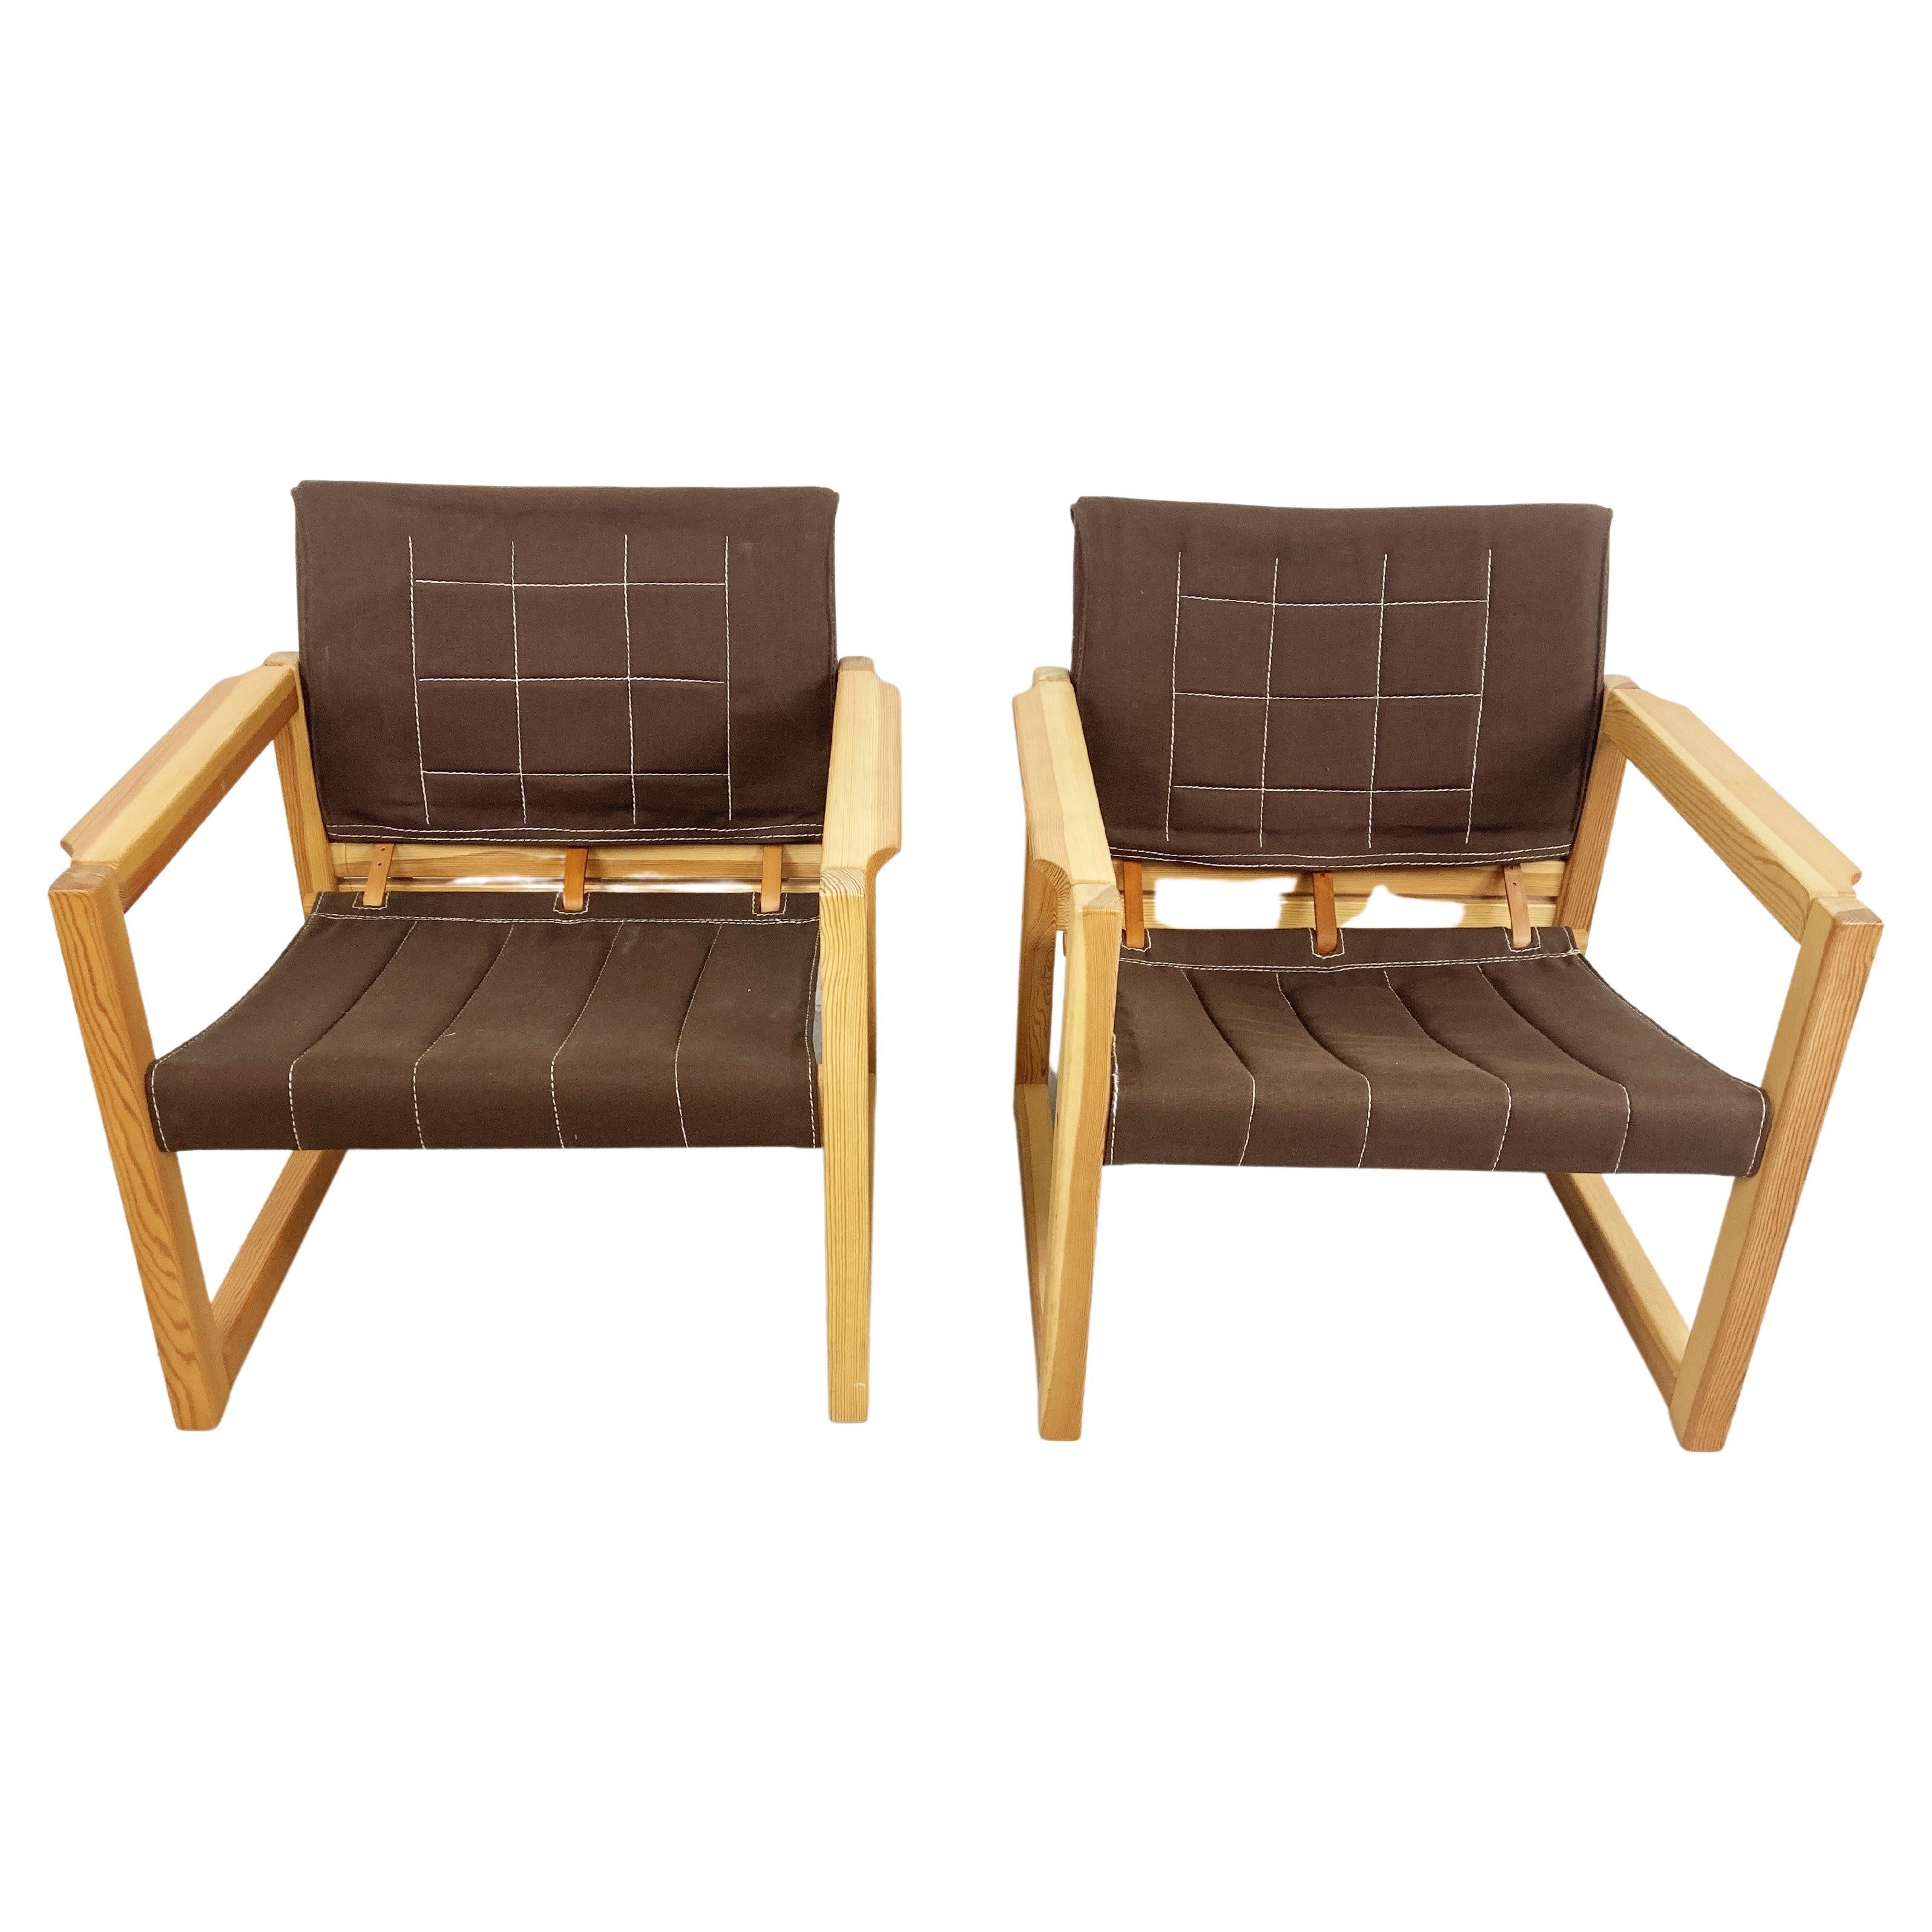 Pair of Diana Armchairs Designed by Karin Mobring for Ikea, 1980s For Sale